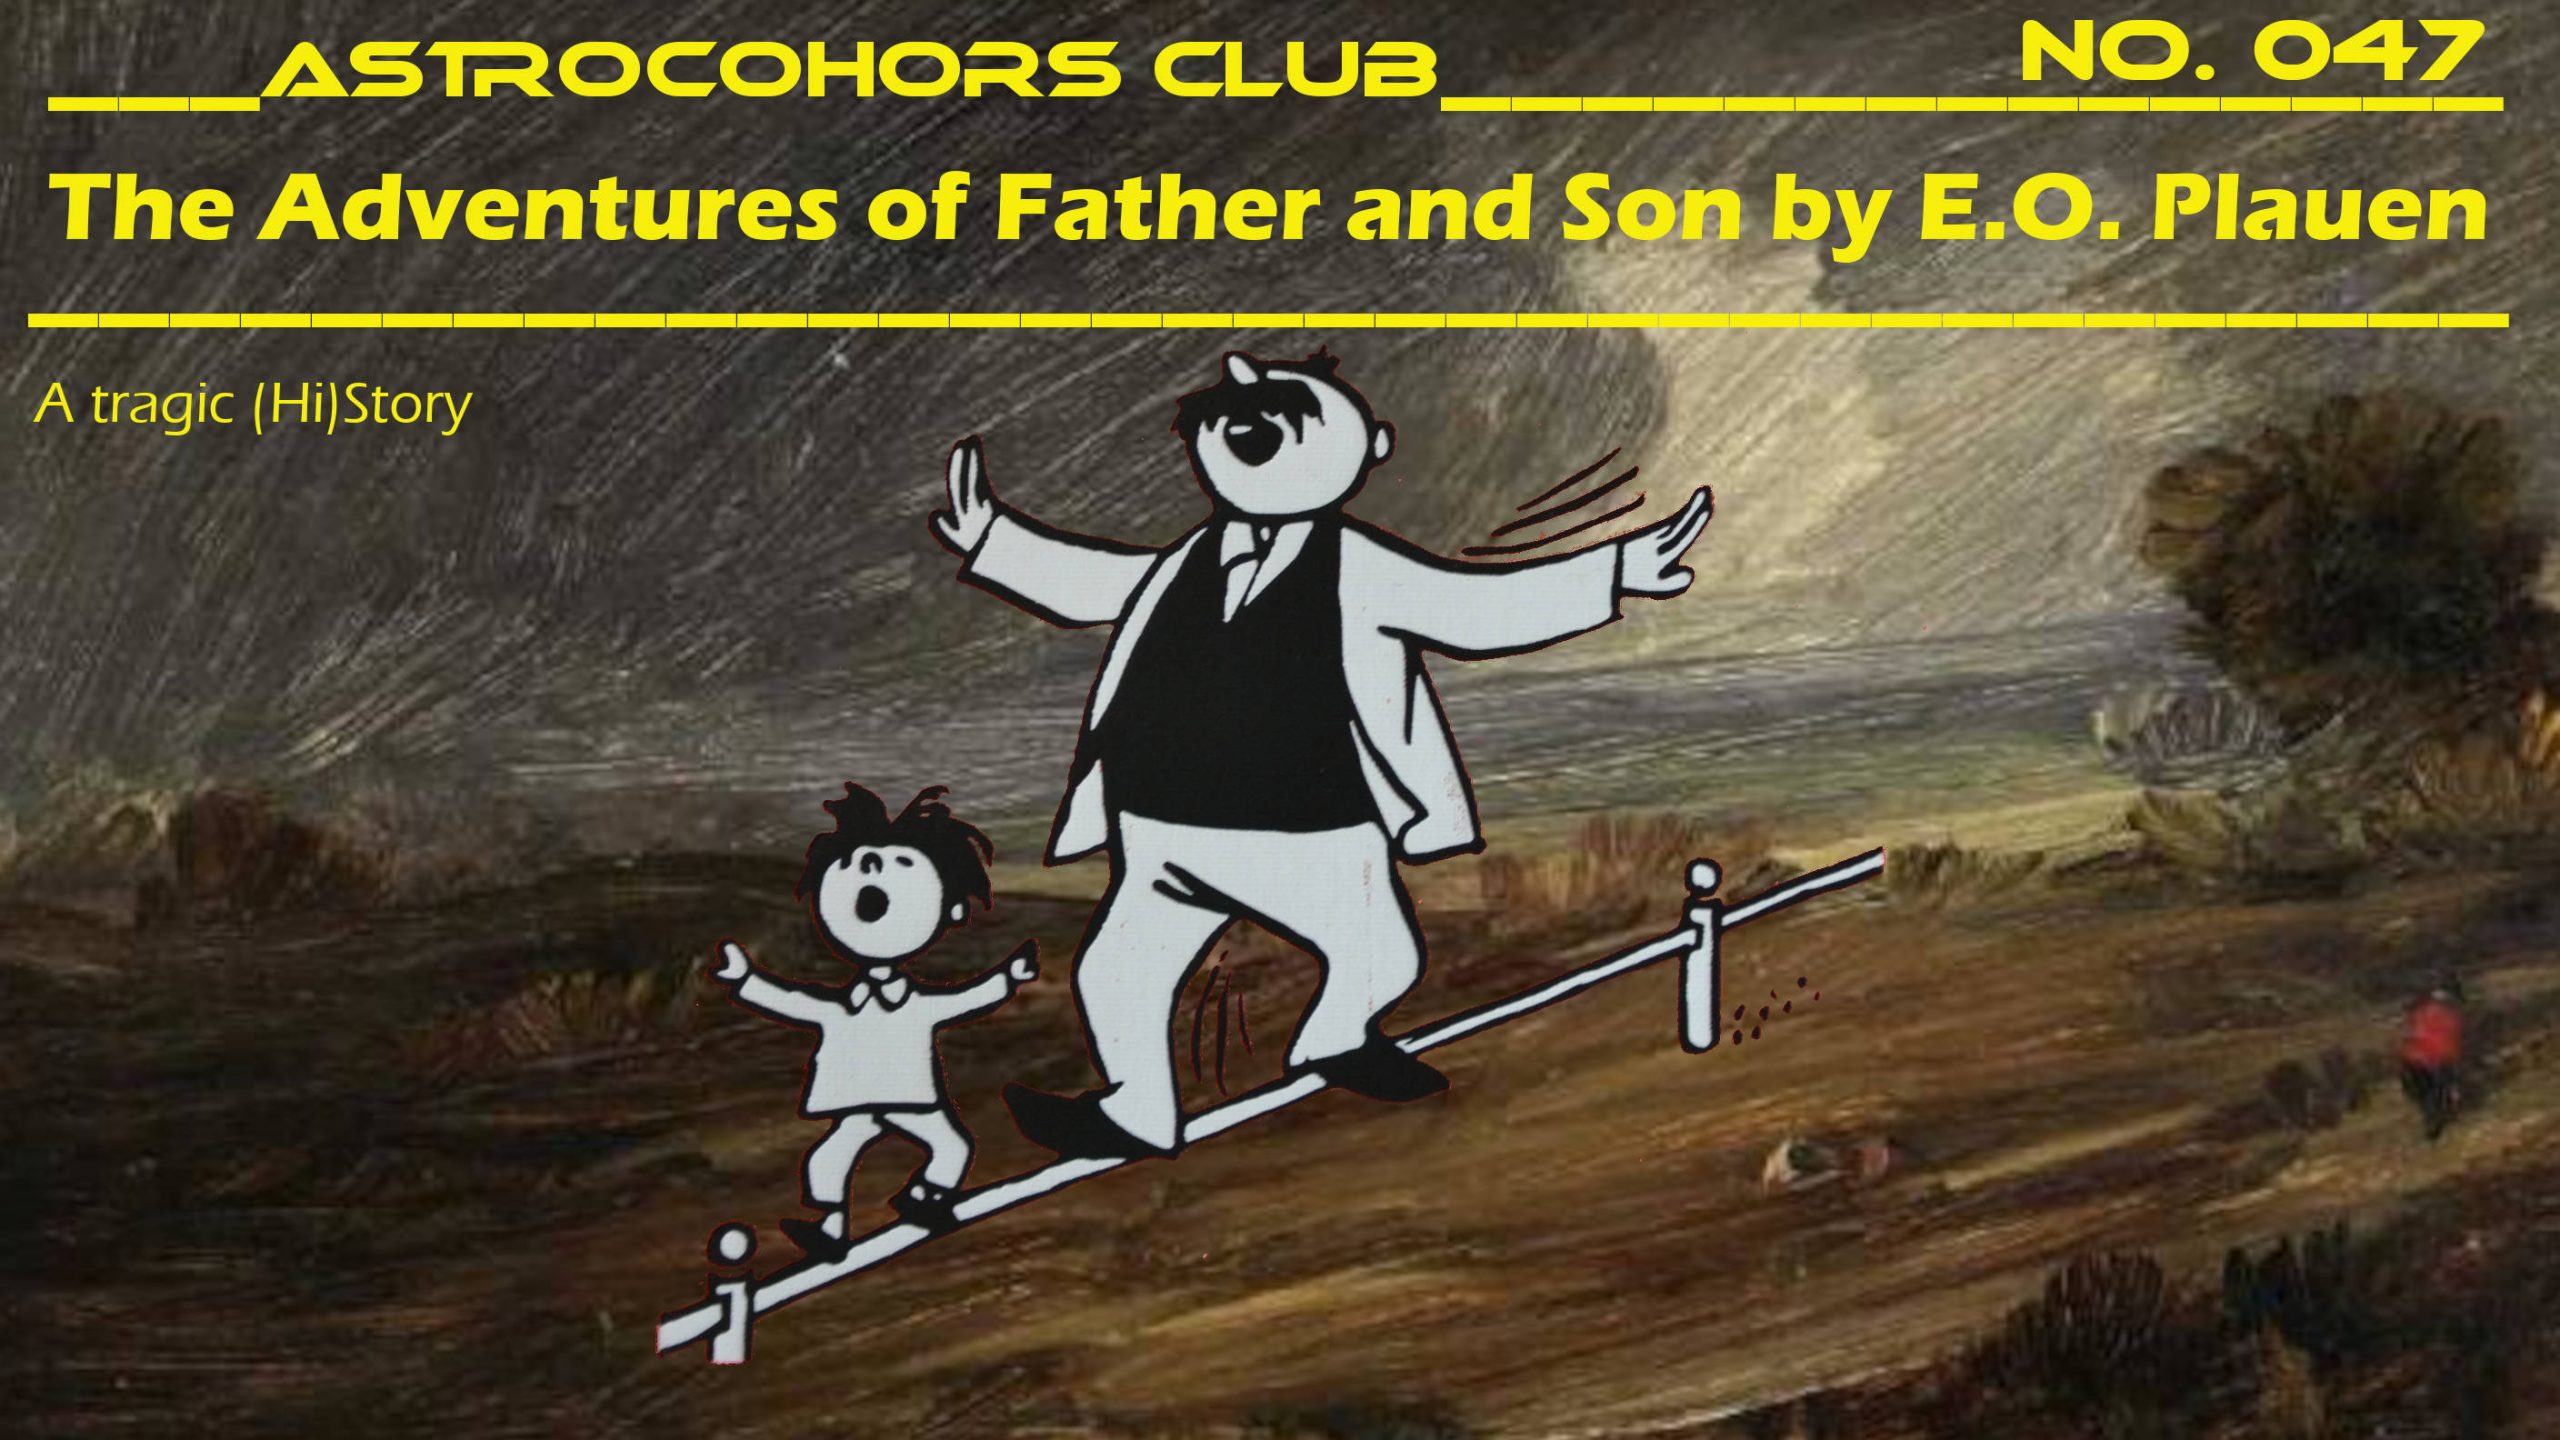 ASTROCOHORS CLUB No. 047: The Adventures of Father and Son by E.O. Plauen – A tragic (Hi)Story